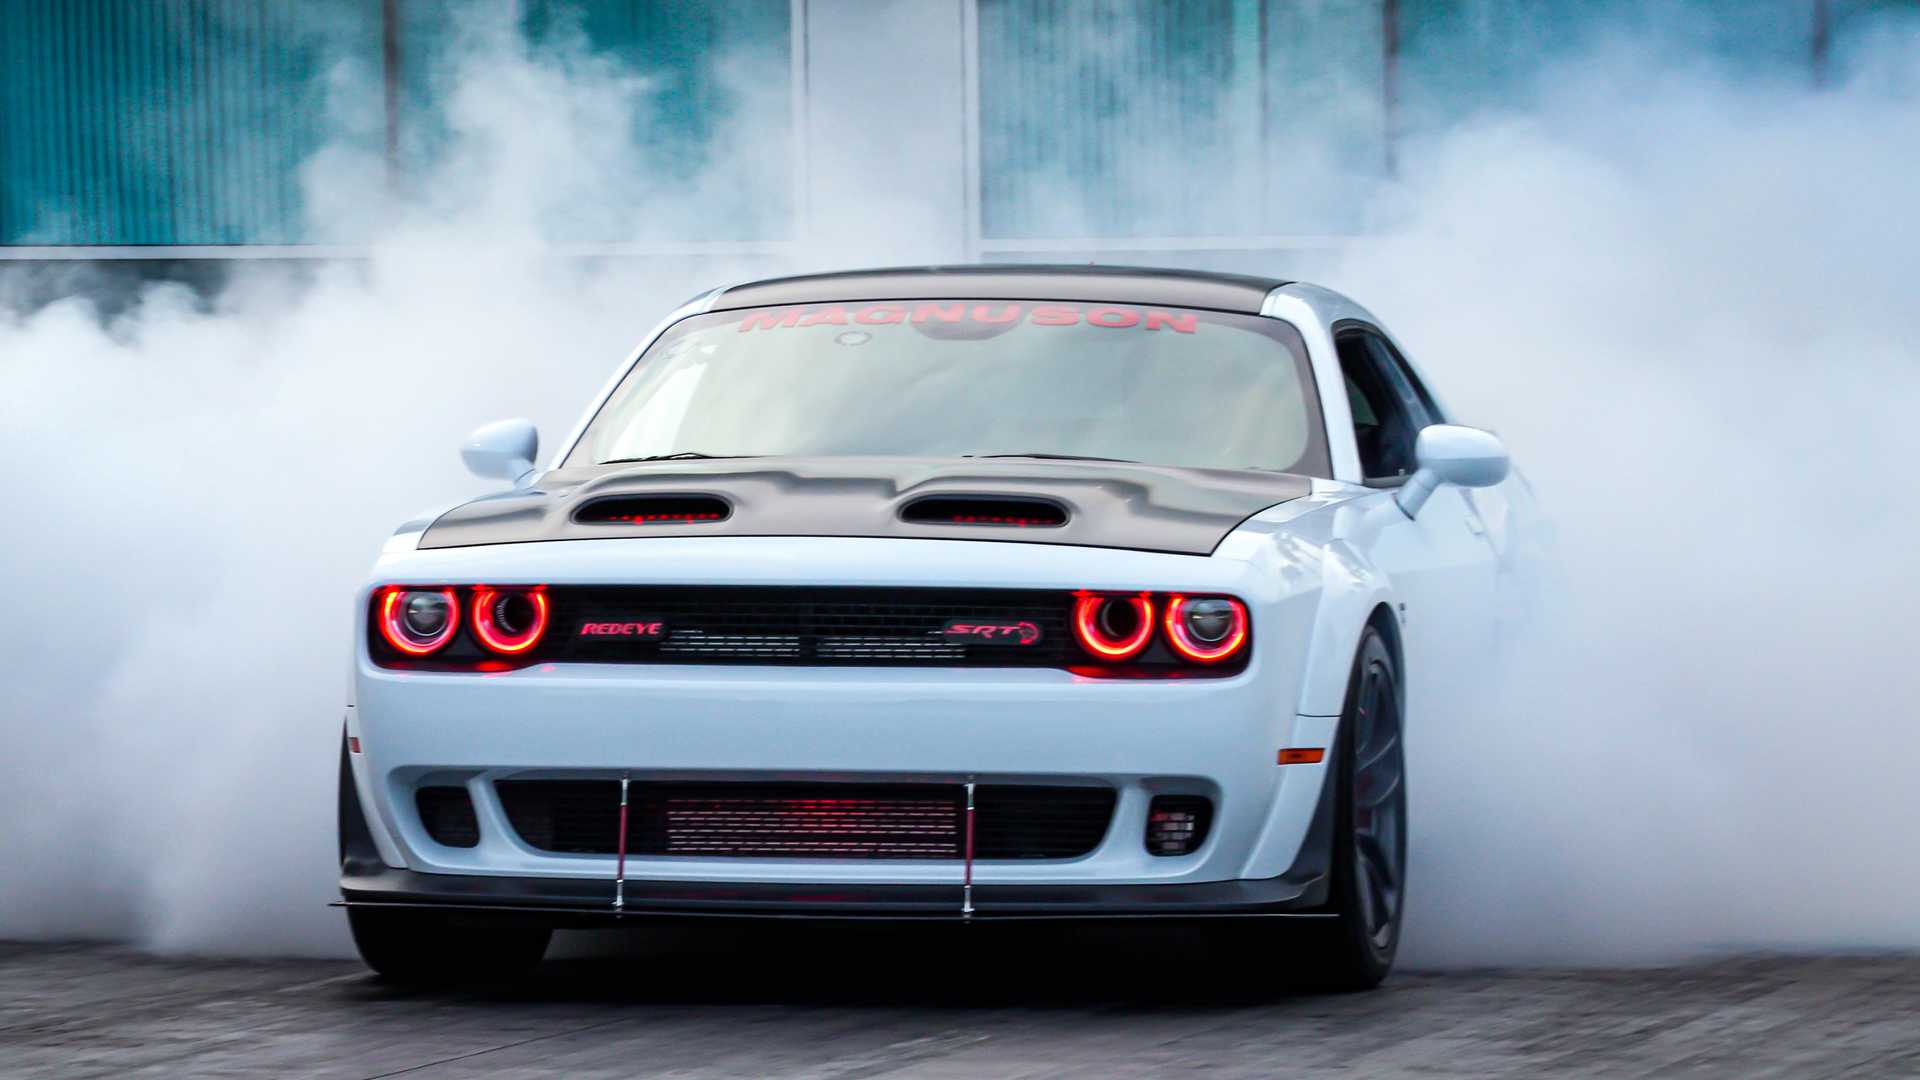 Last Day To Enter To Win This 000 HP Challenger Hellcat Redeye!